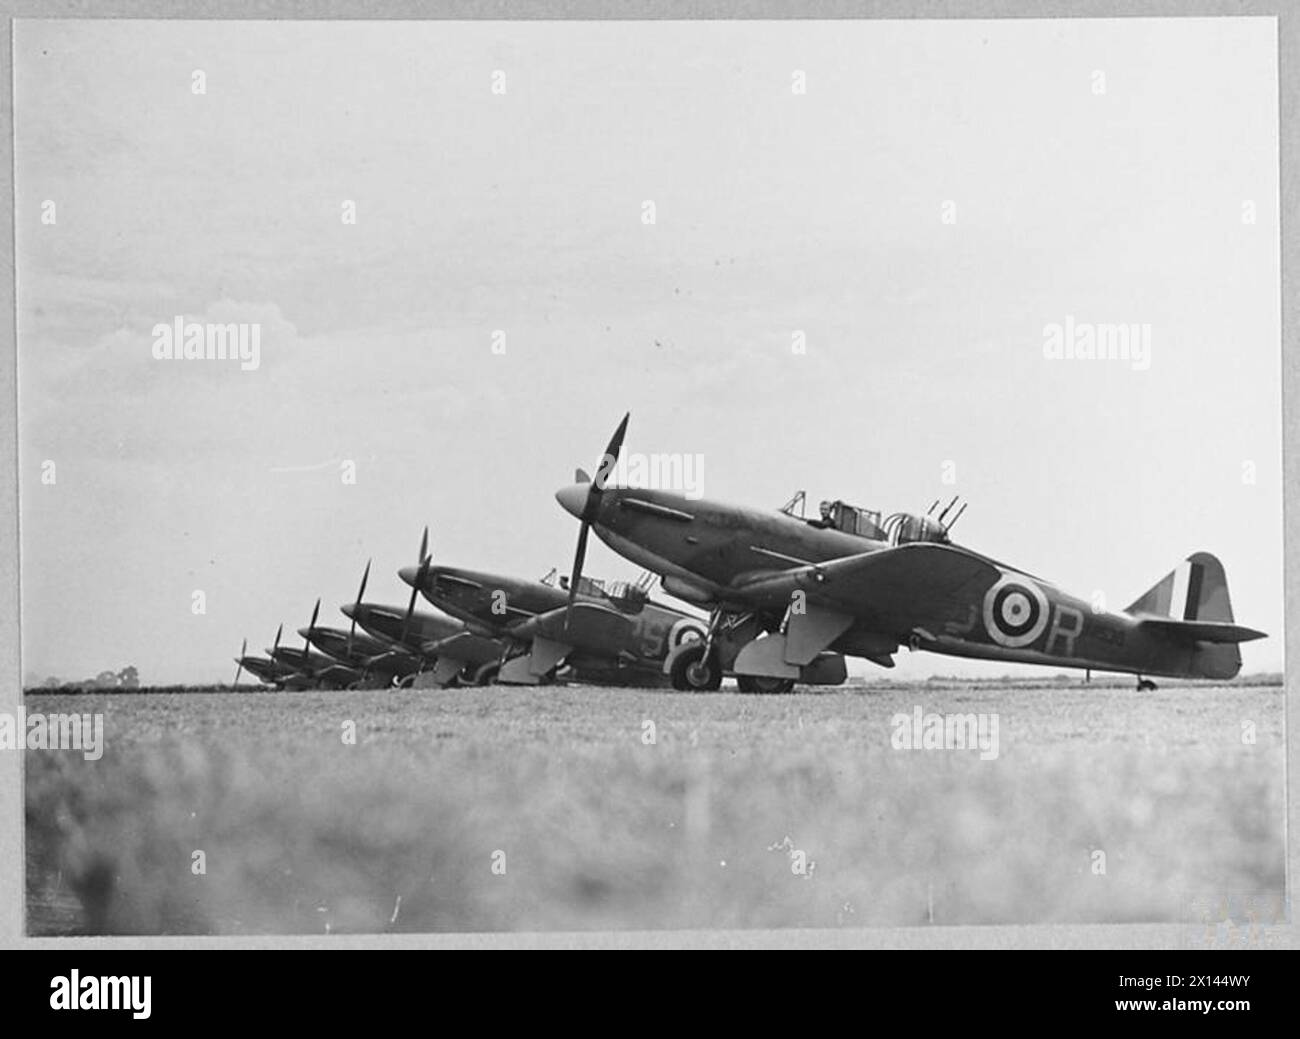 THE BATTLE OF BRITAIN 1940 - Boulton Paul Defiants of No. 264 Squadron, Kirton in Lindsey, Lincolnshire, August 1940. N1536 PS-R nearest Royal Air Force Stock Photo